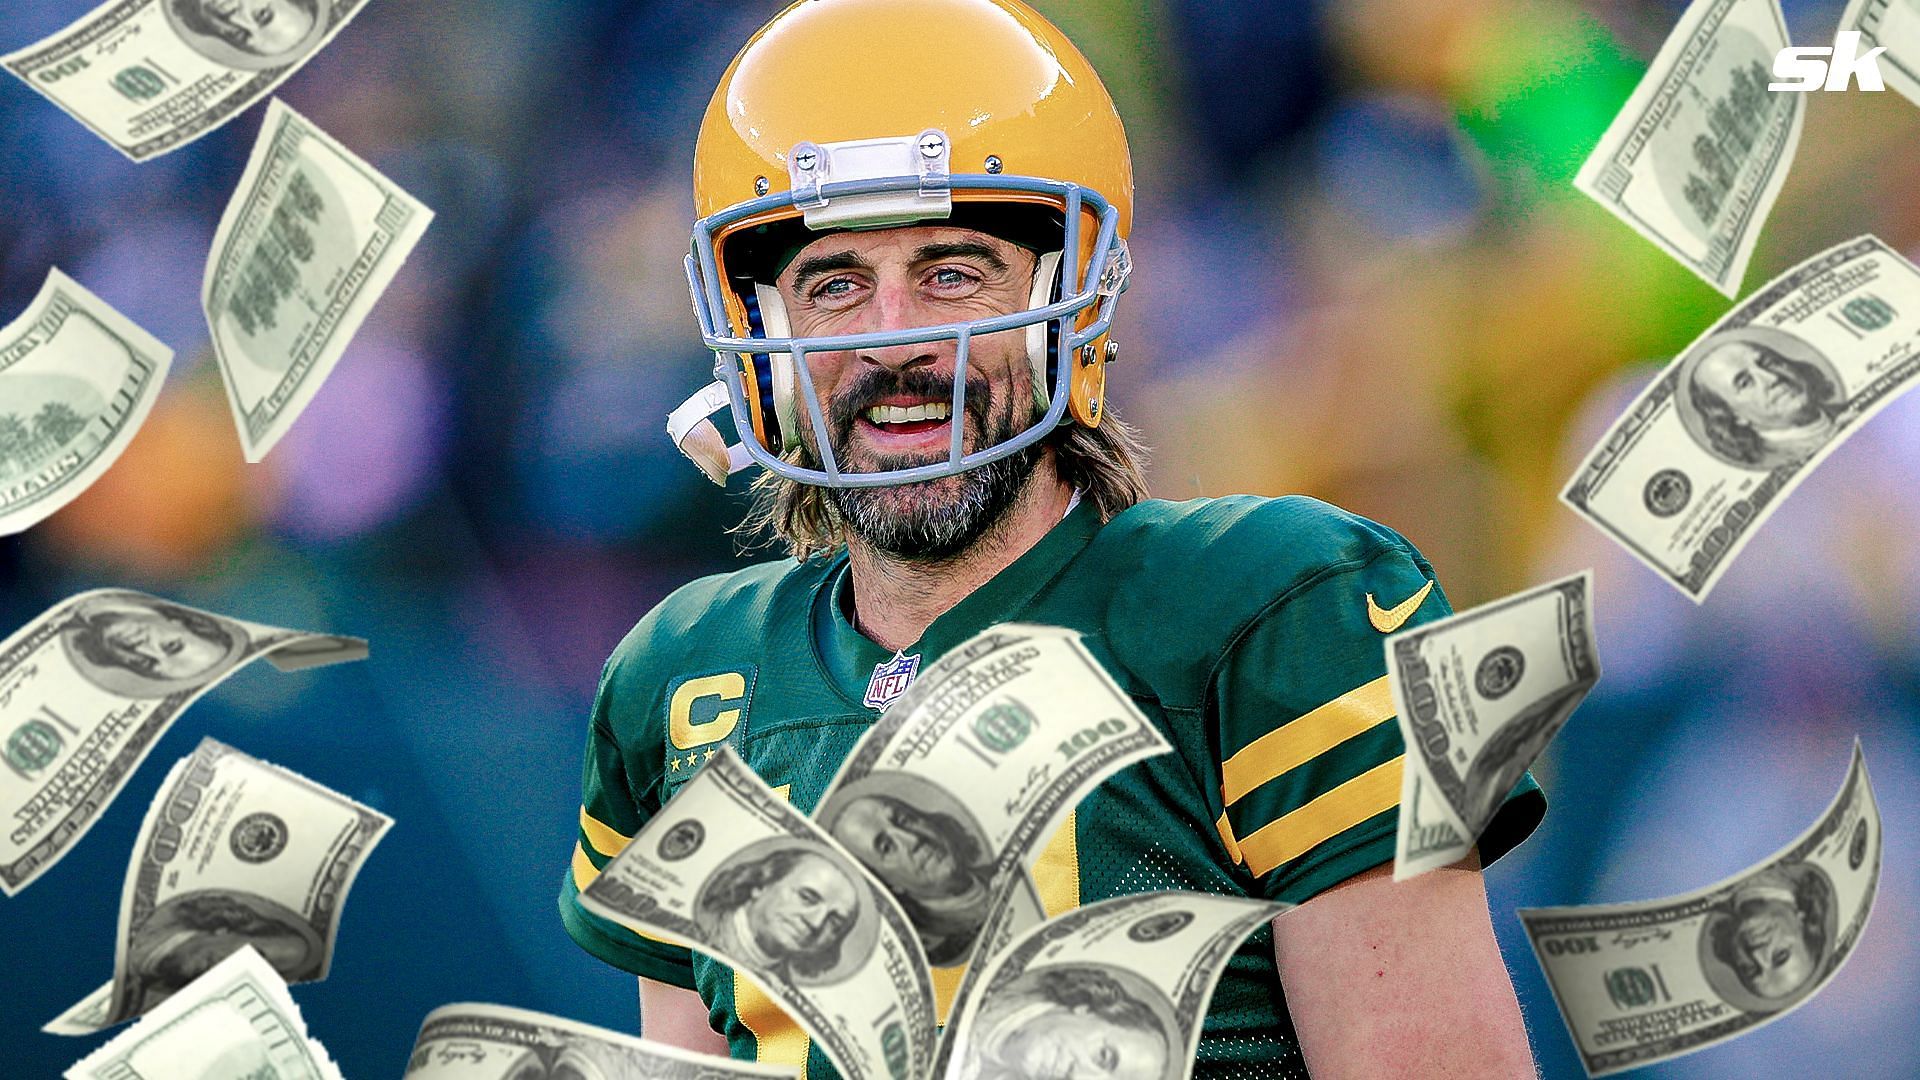 Analyst believes quarterback Aaron Rodgers contract demands will lead to exit from Packers